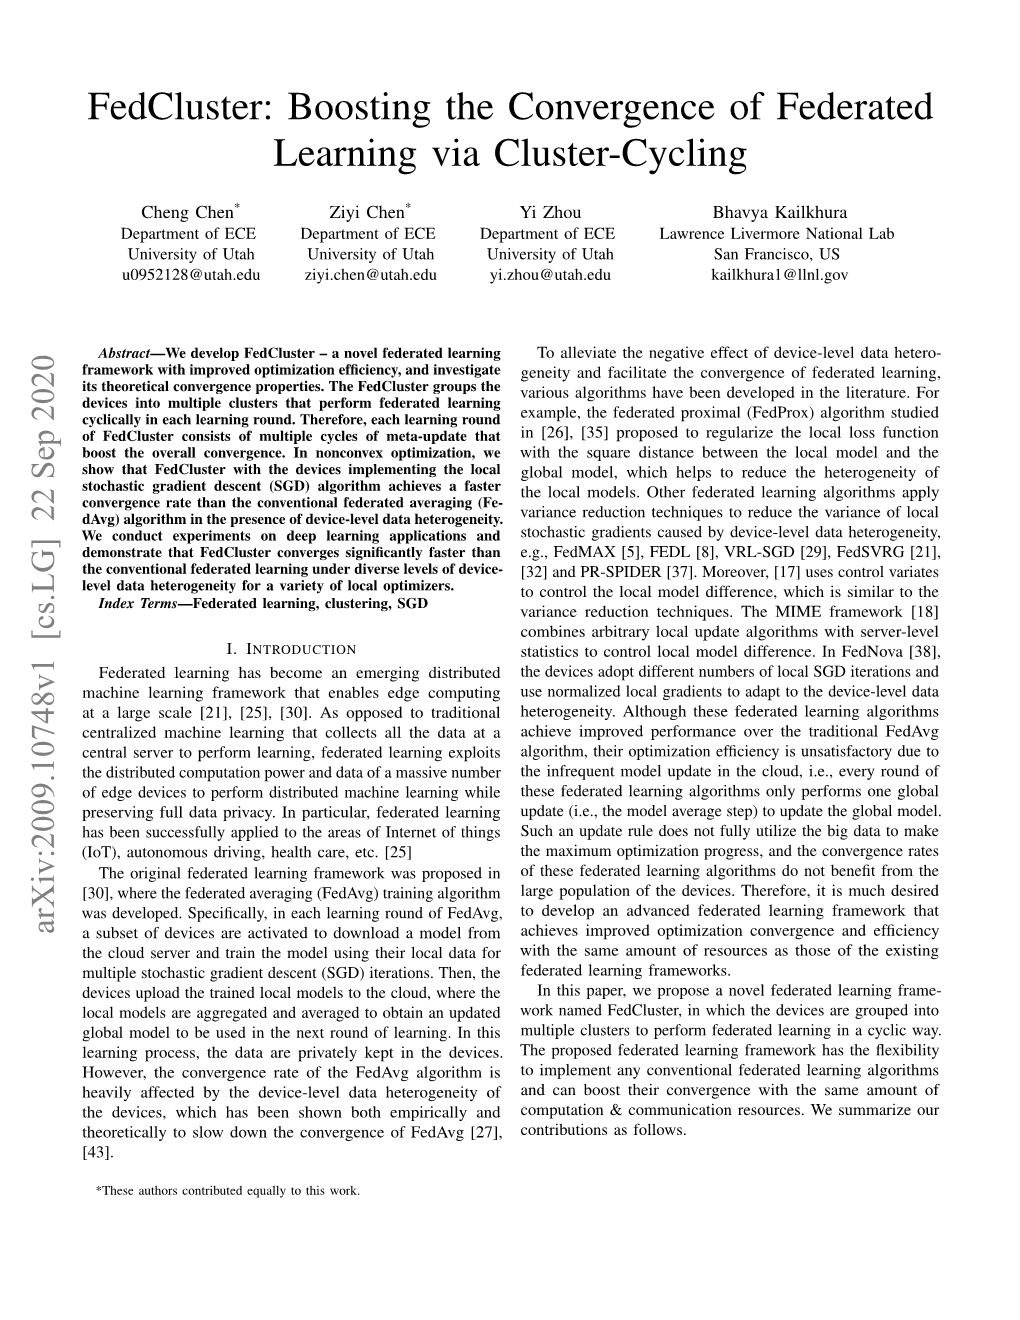 Boosting the Convergence of Federated Learning Via Cluster-Cycling